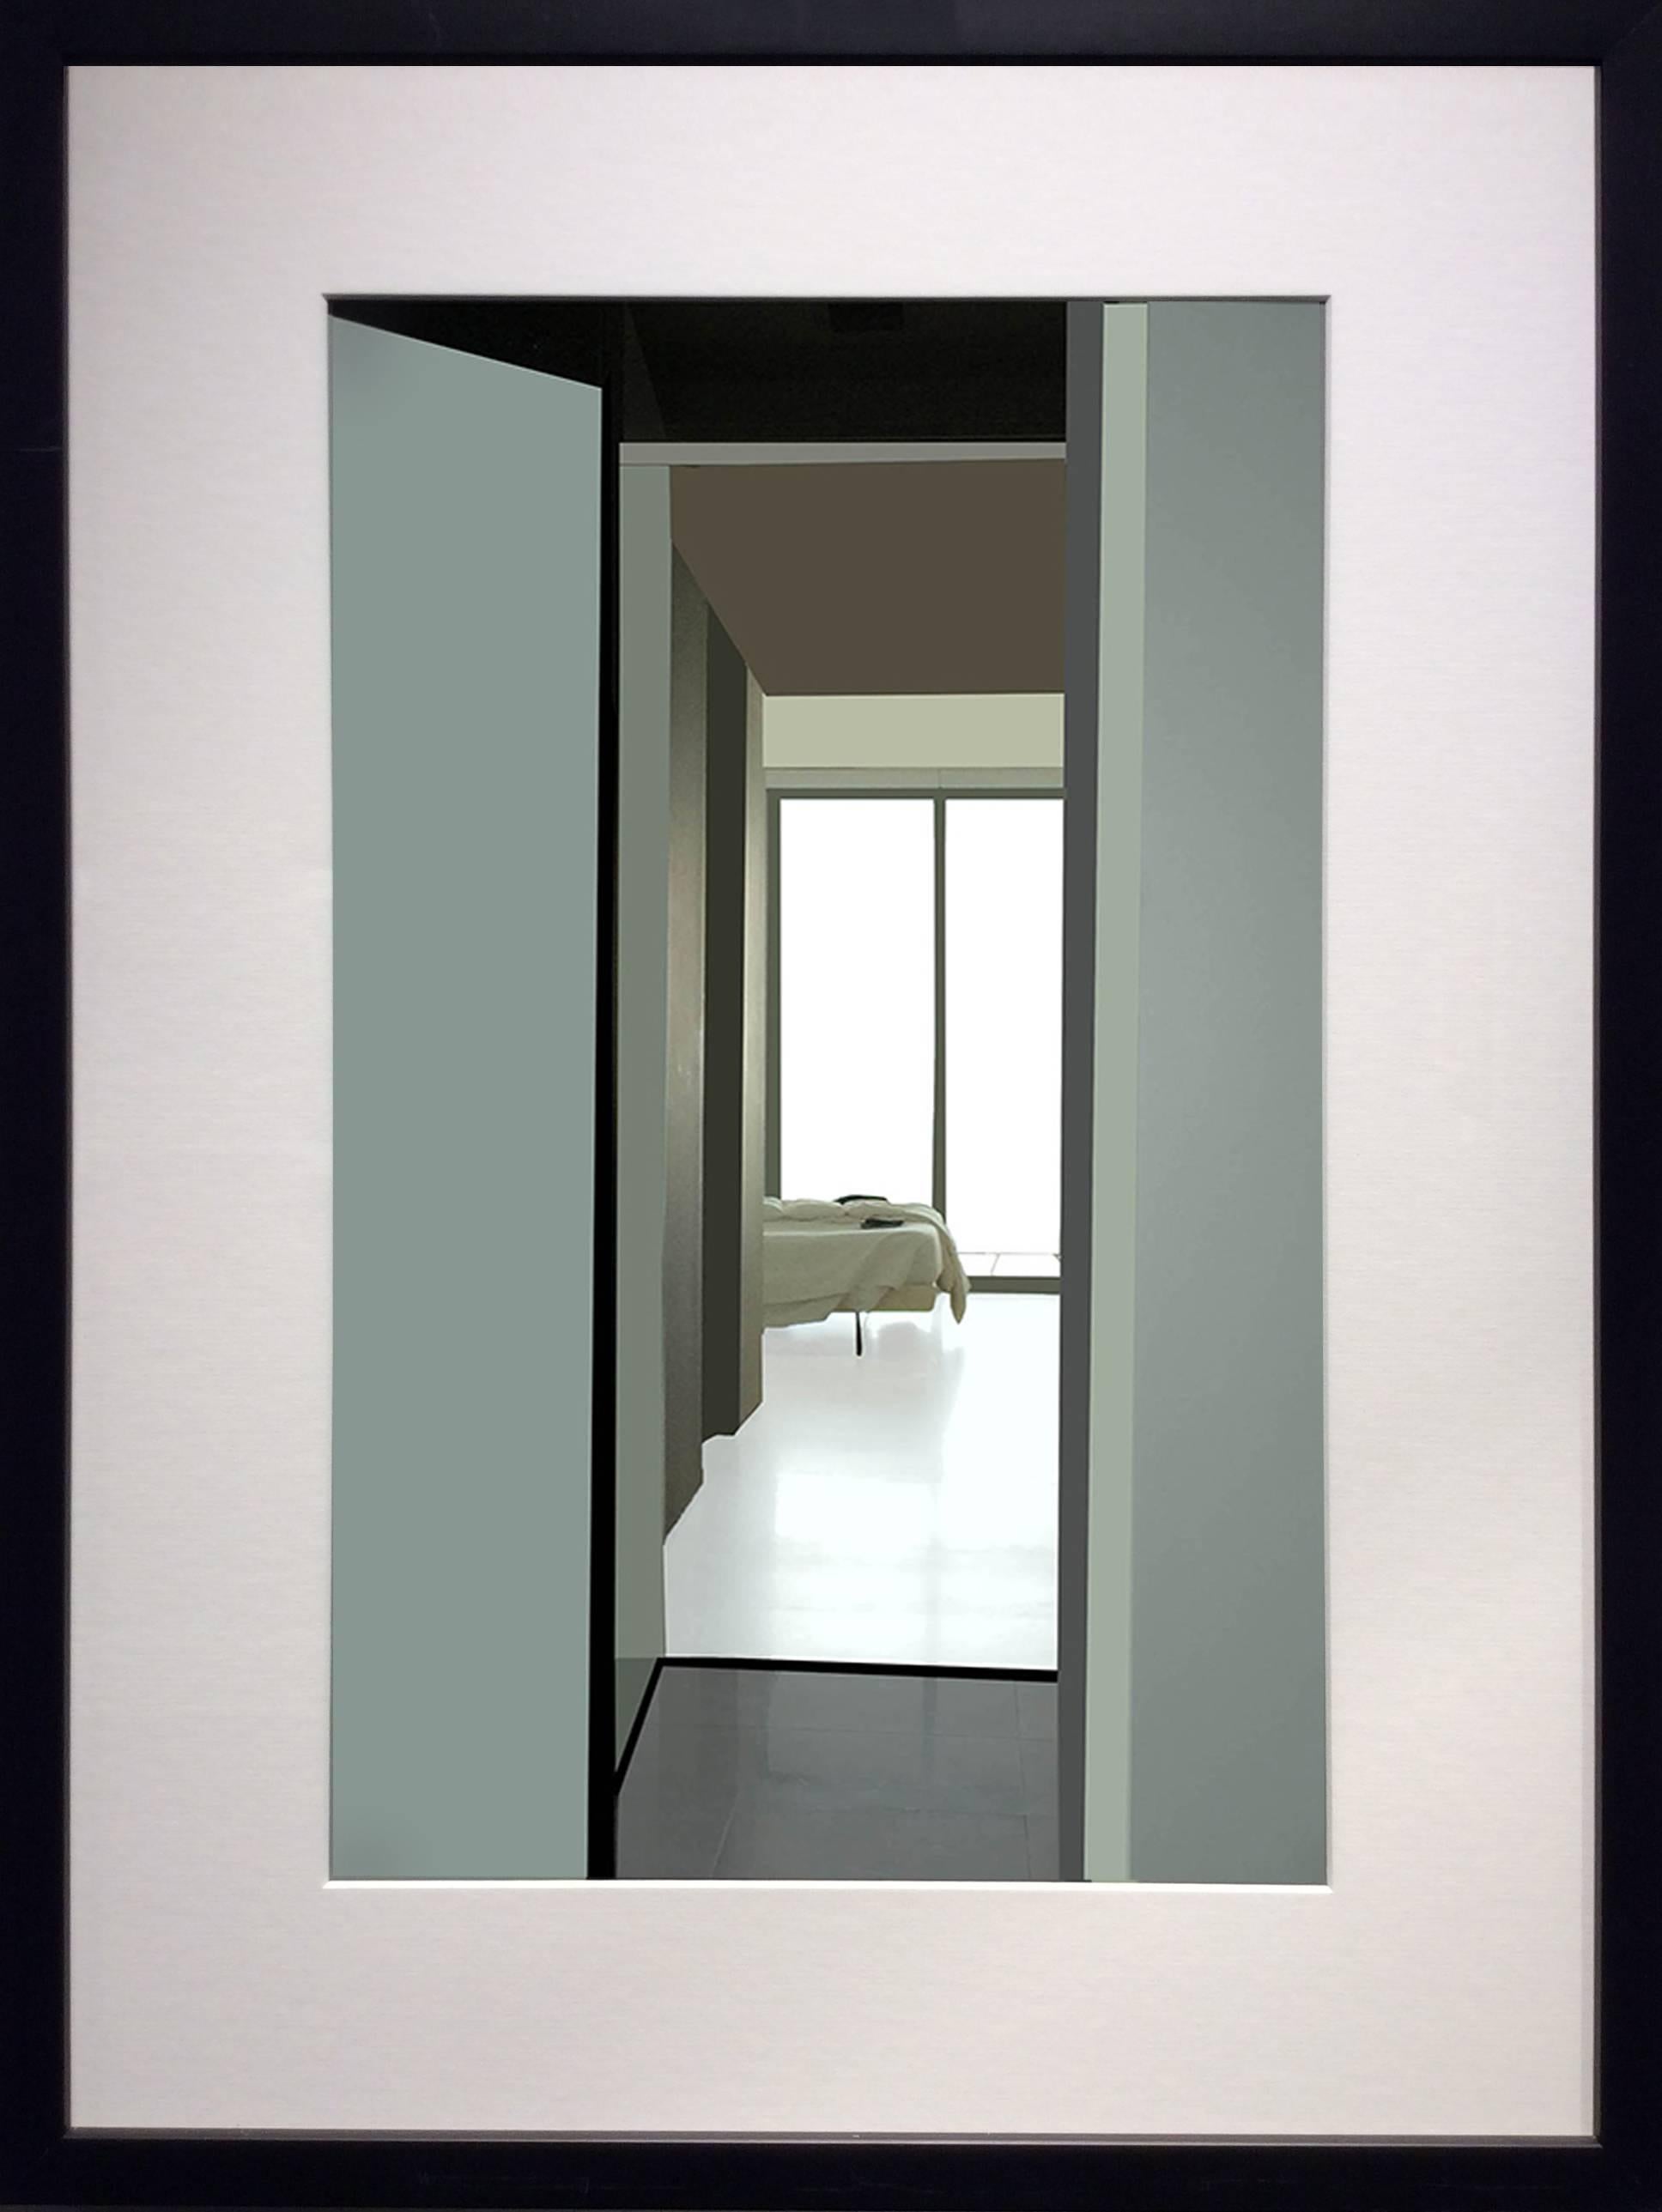 Bed: Contemporary Inkjet Print of Minimalist Interior in Muted Teal, Black Frame - Photograph by Stephanie Blumenthal